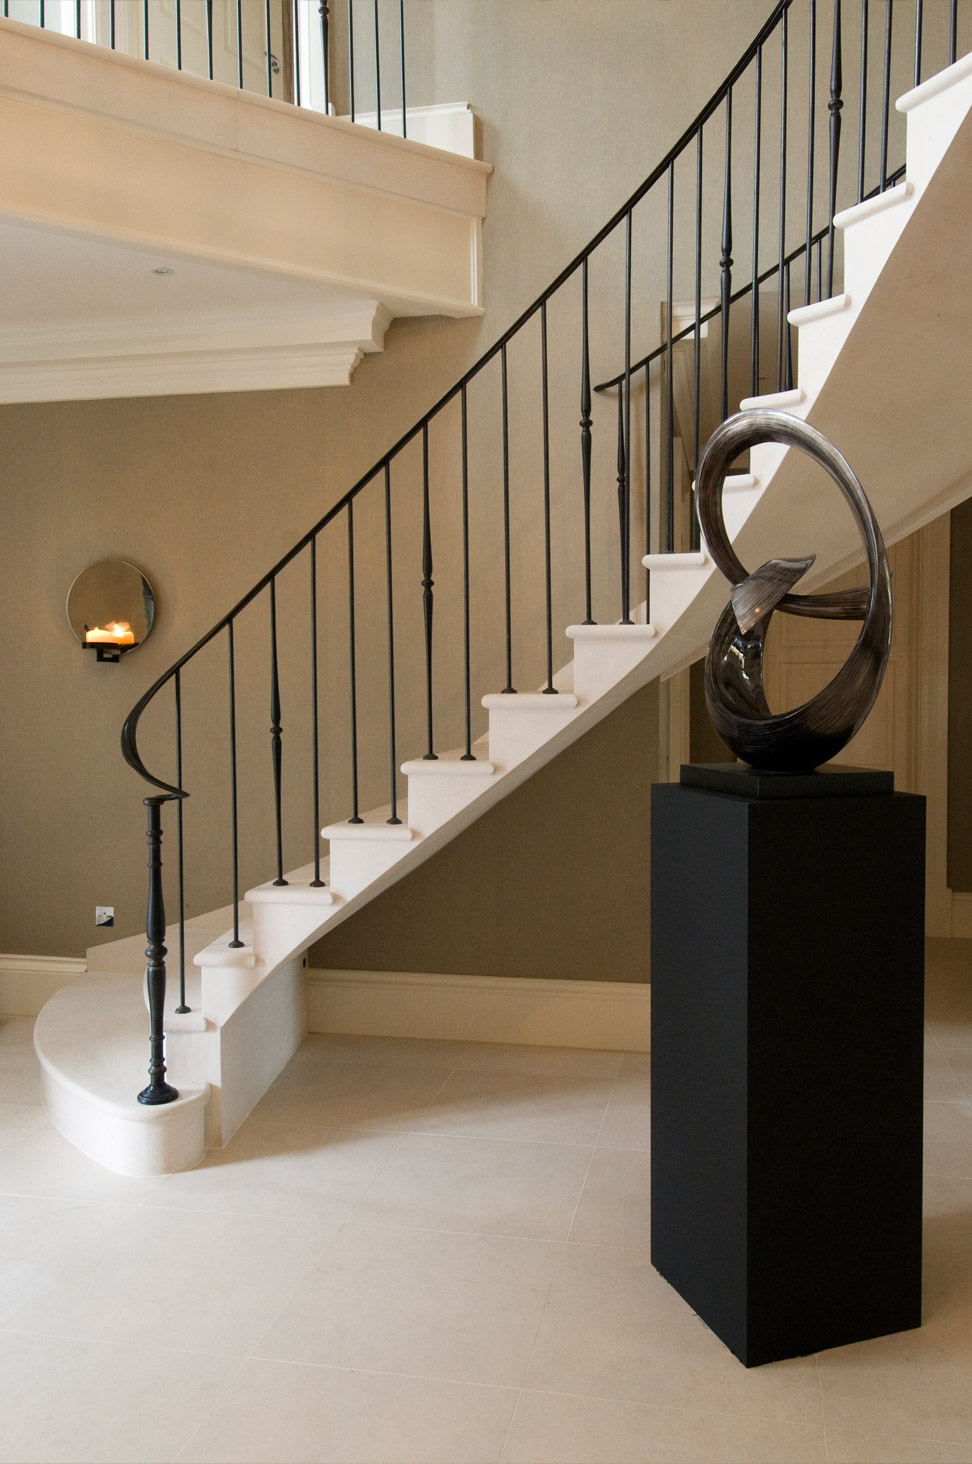 19. Moleanos stone cantilever stair with elegant metal balustrade and matching flooring – Surrey